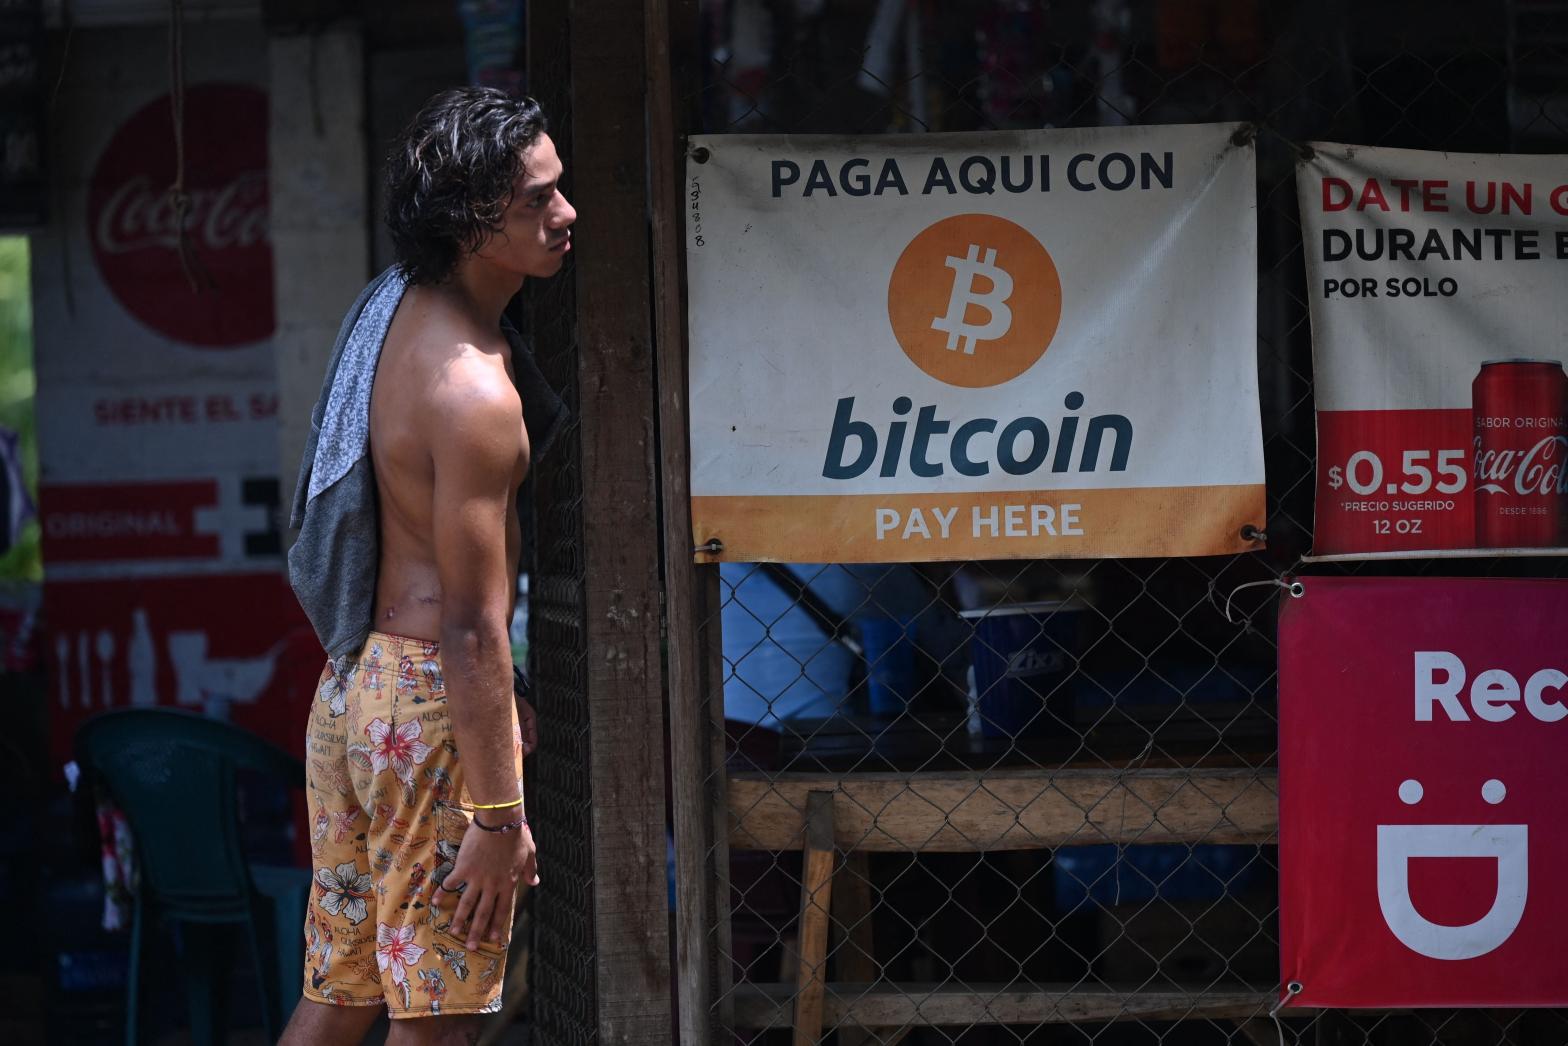 Bitcoin as legal tender has struggled to see widespread use in El Salvador, a new National Bureau of Economic Research report found. (Photo: Marvin Recinos, Getty Images)